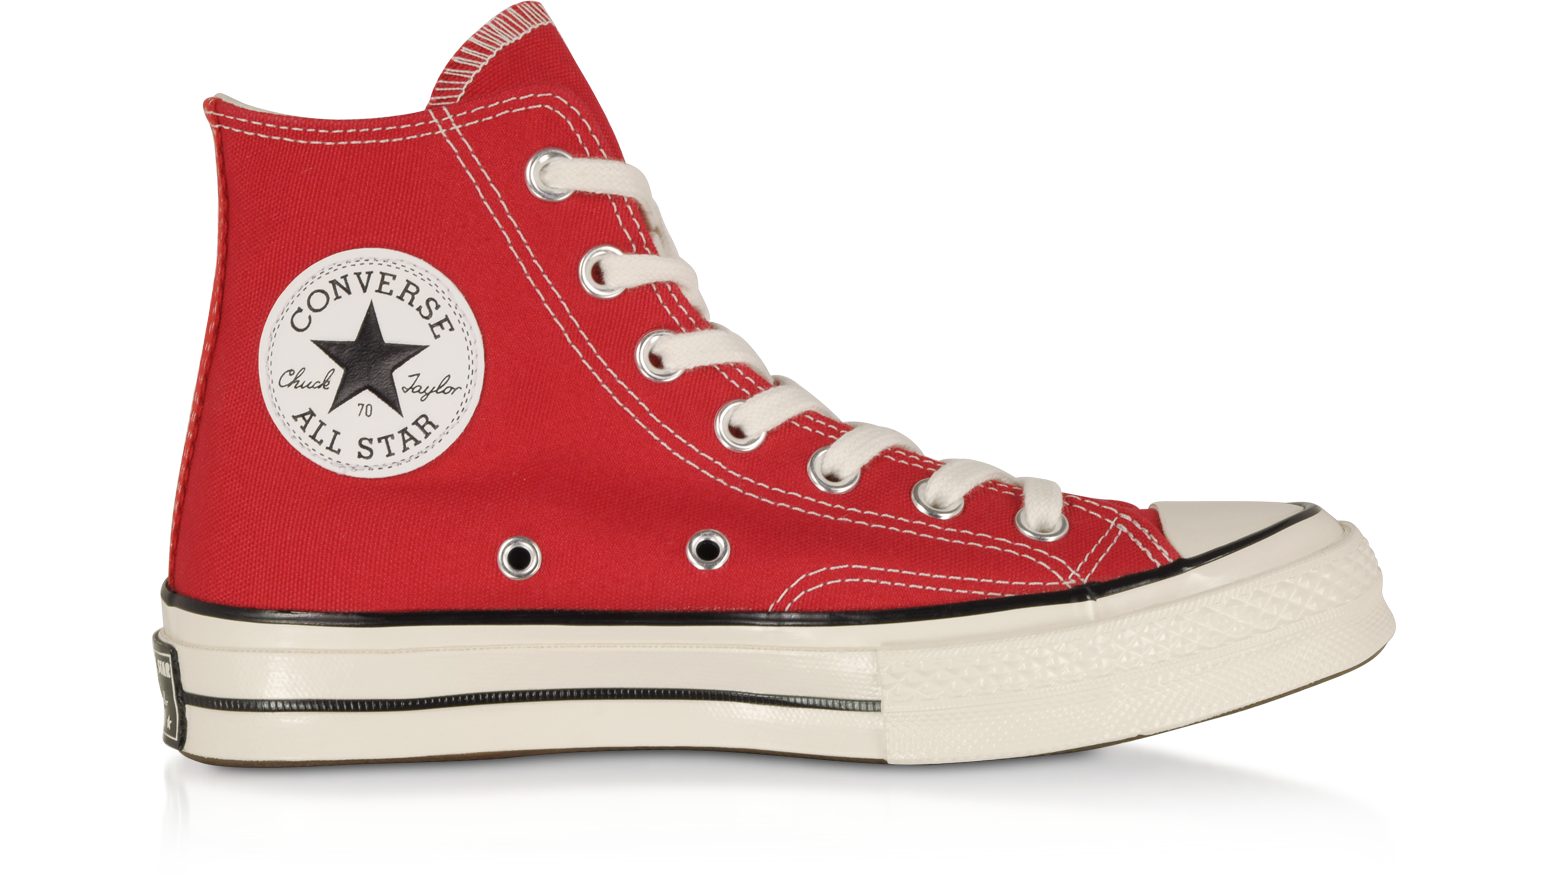 womens red converse tennis shoes